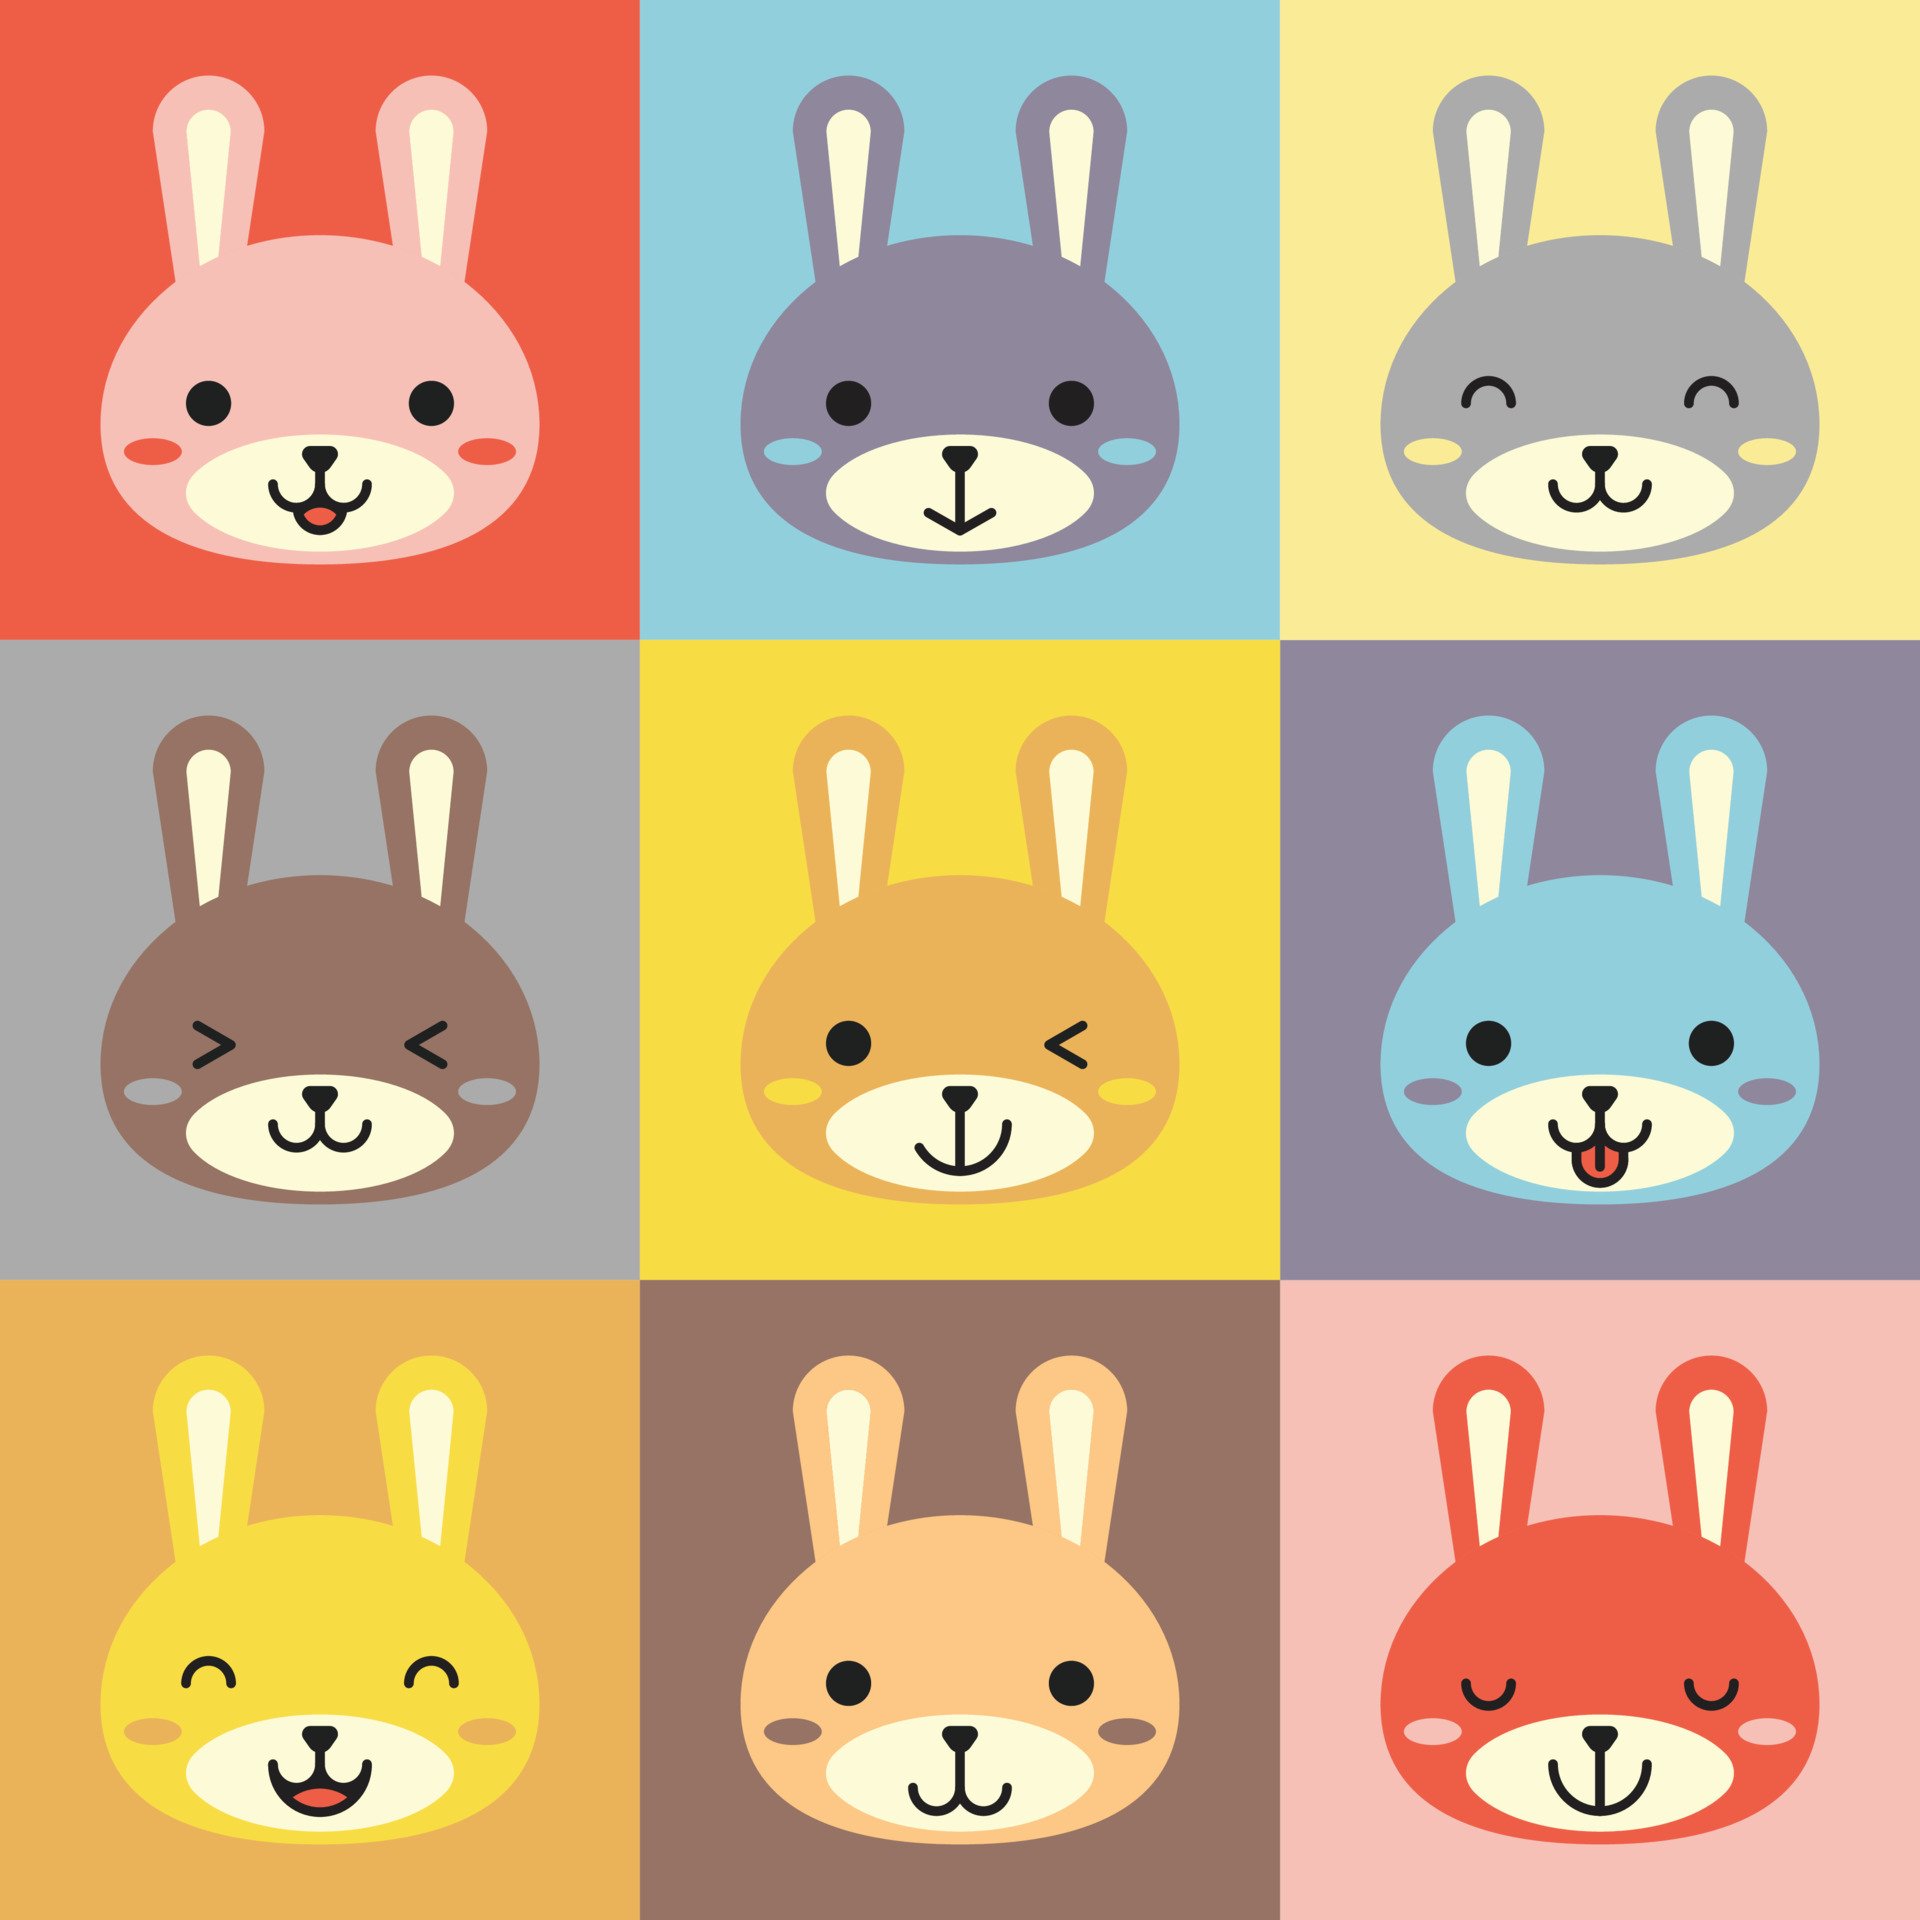 Set of various avatars of bunny facial expressions. Adorable cute baby animal head vector illustration. Simple design of happy smiling animal cartoon face emoticon. Graphics and colorful background. Vector Art